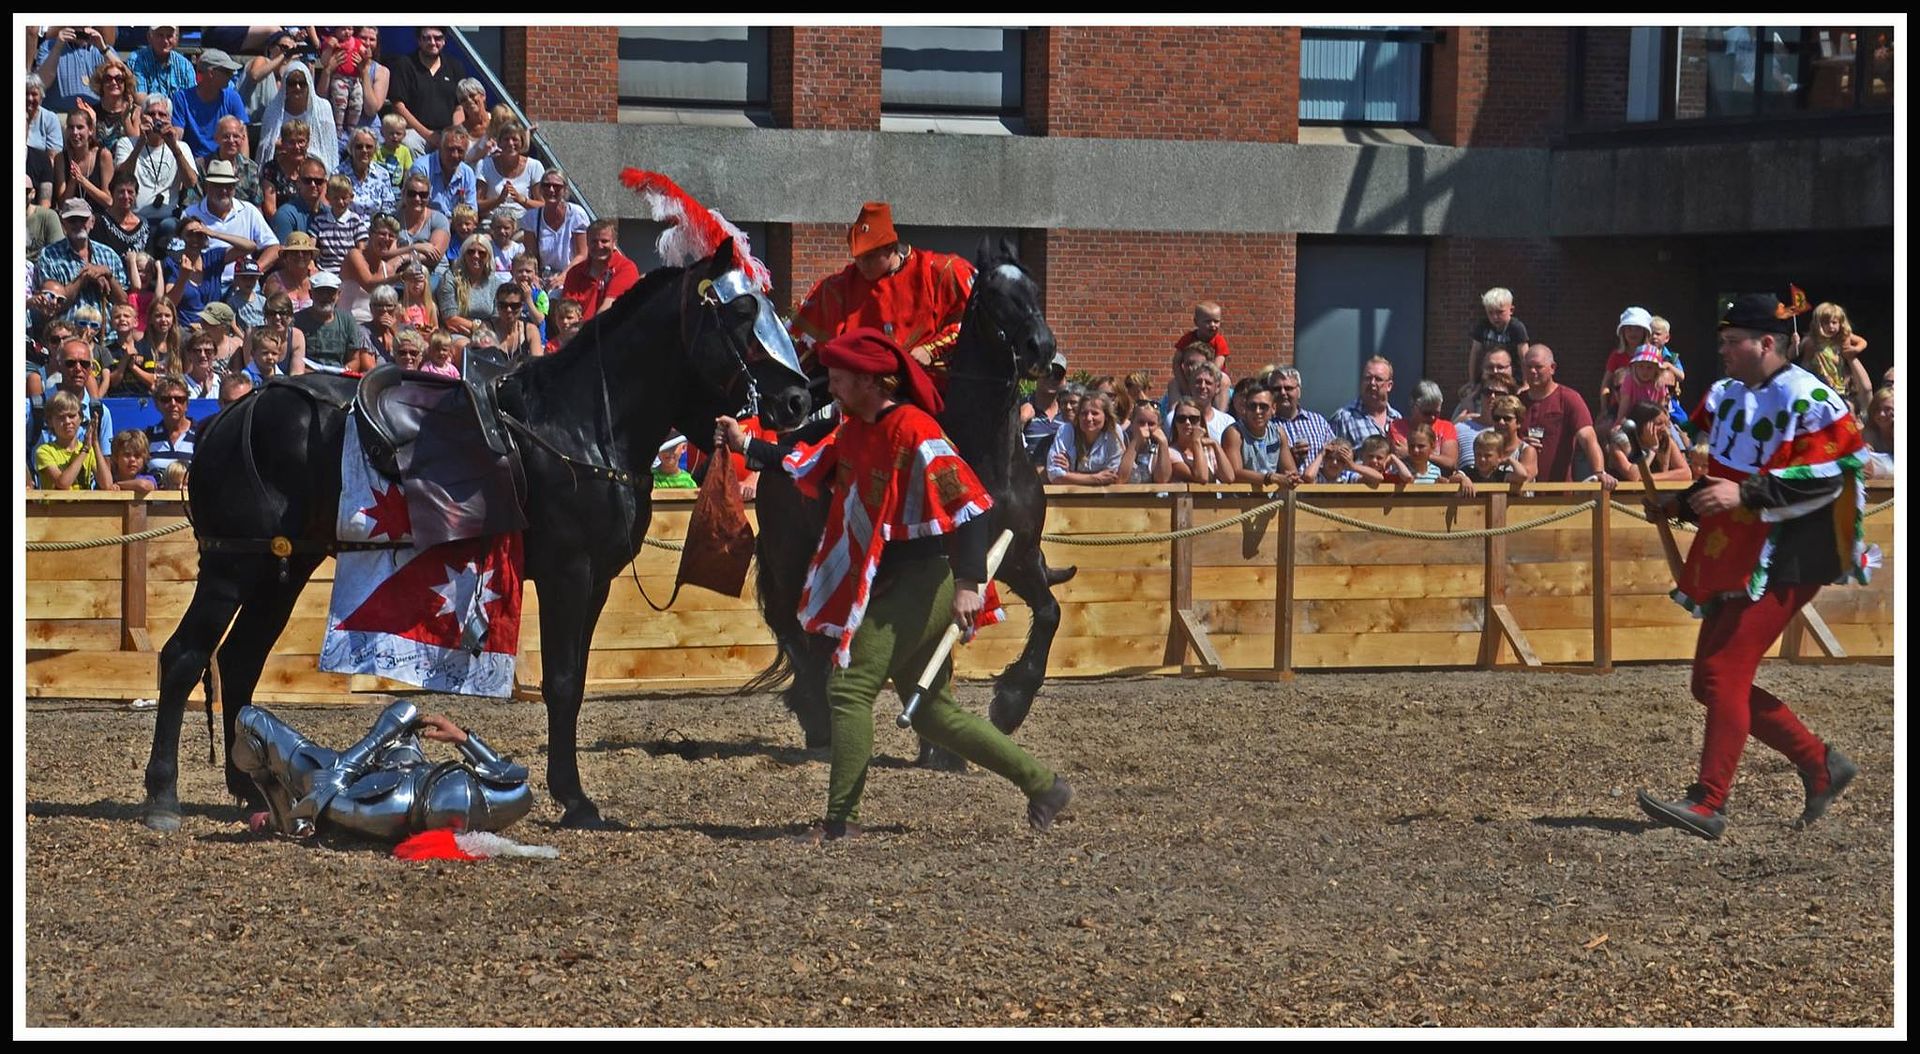 Andreas Wenzel comes off his horse during a mounted melee at the Nyborg Joust 2014 (photo by Hanno van Harten)